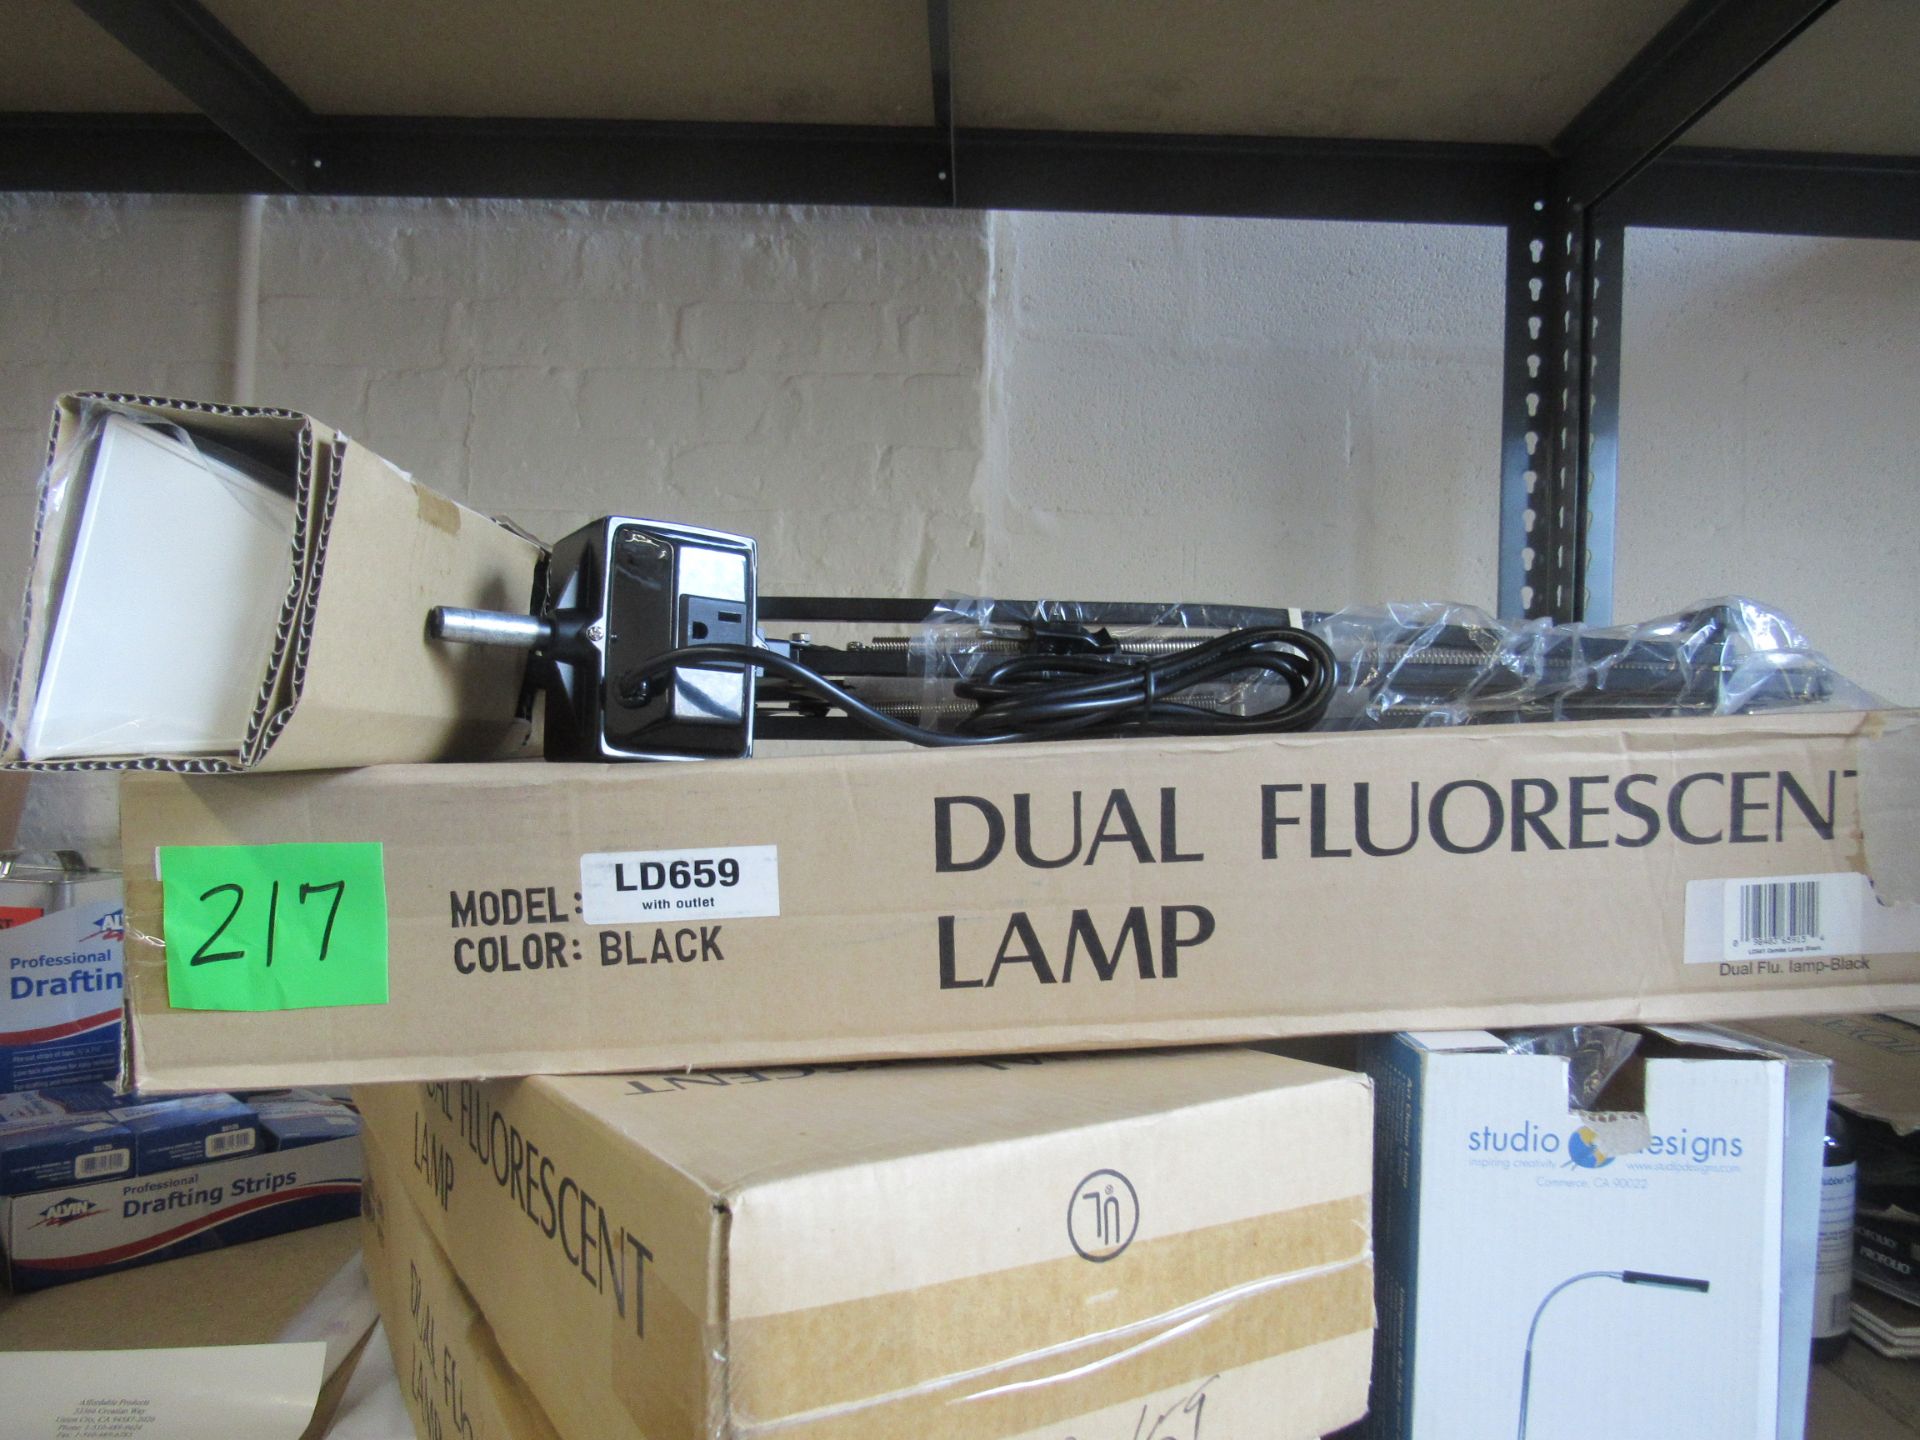 Dual Fluorescent lamp, model LD659 with outlet, black